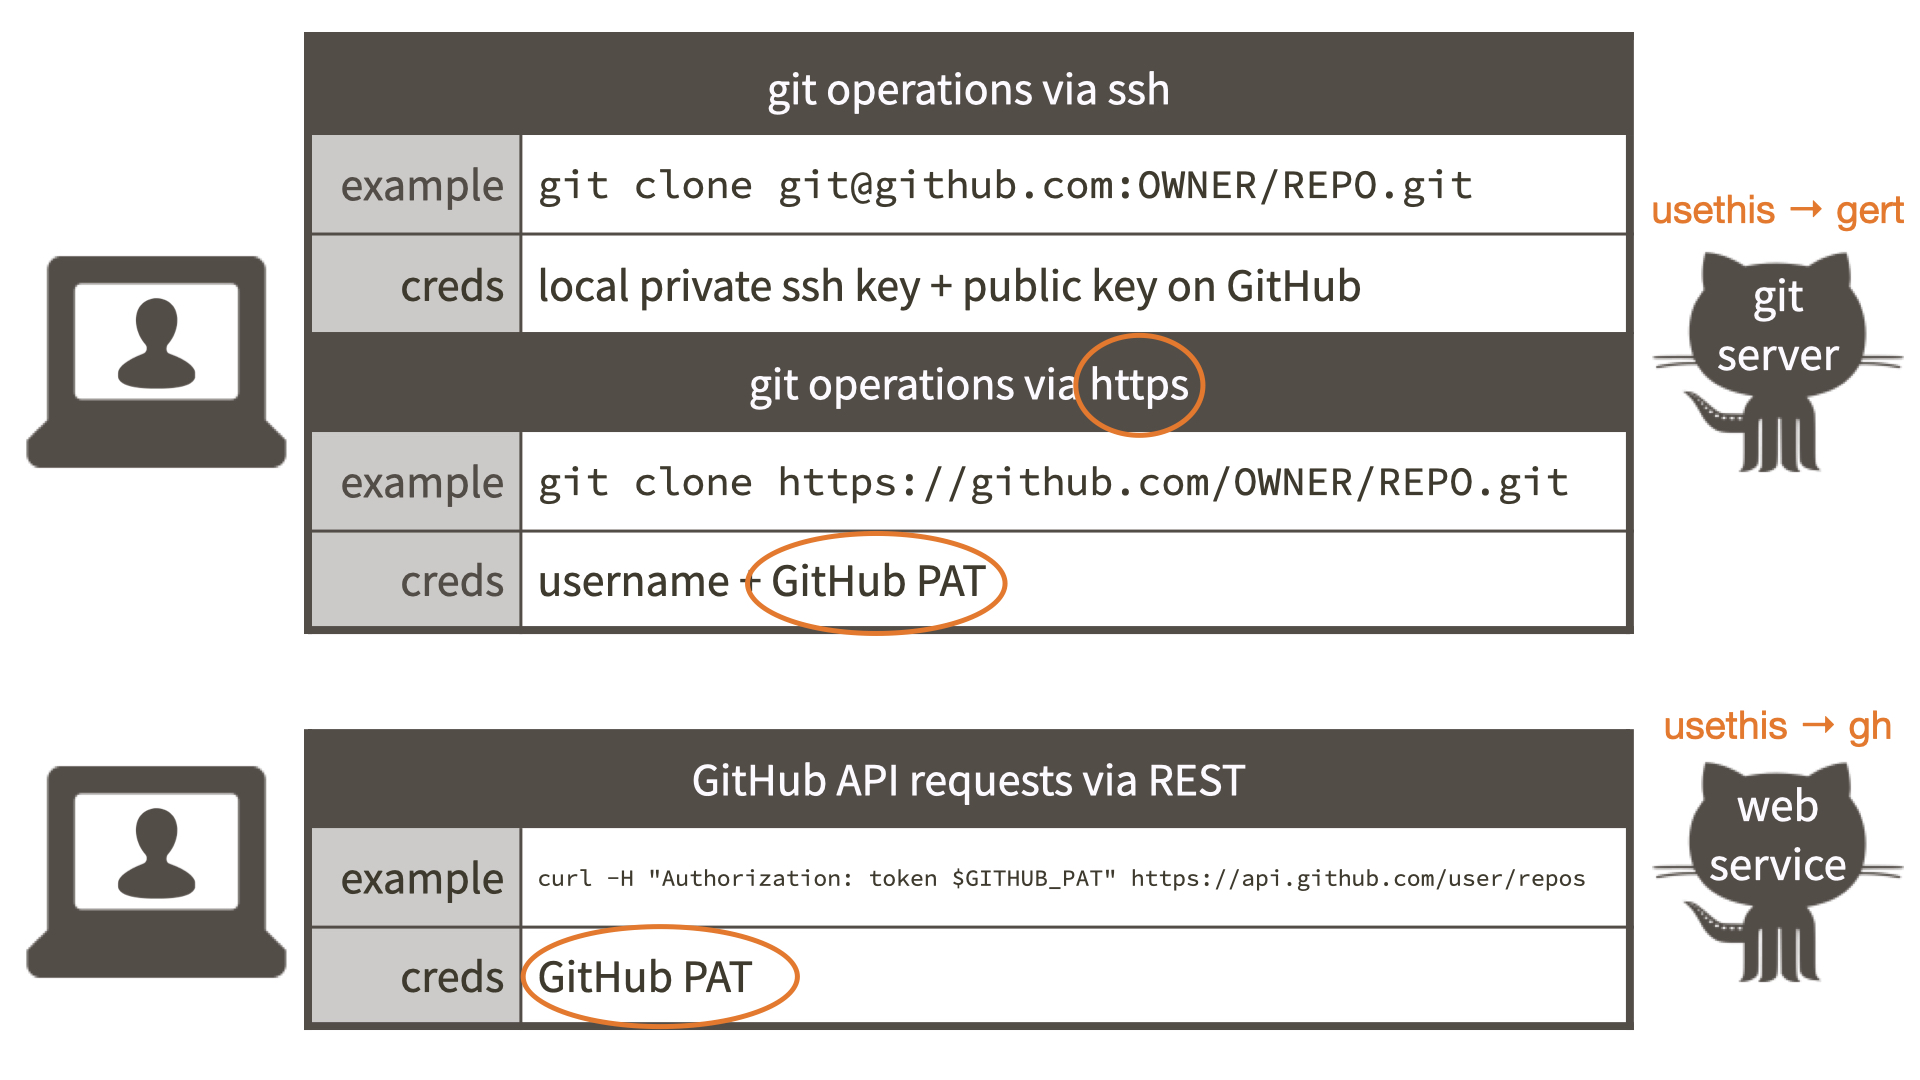 Diagram showing different ways of interacting with GitHub as a server and the credential needed for each method